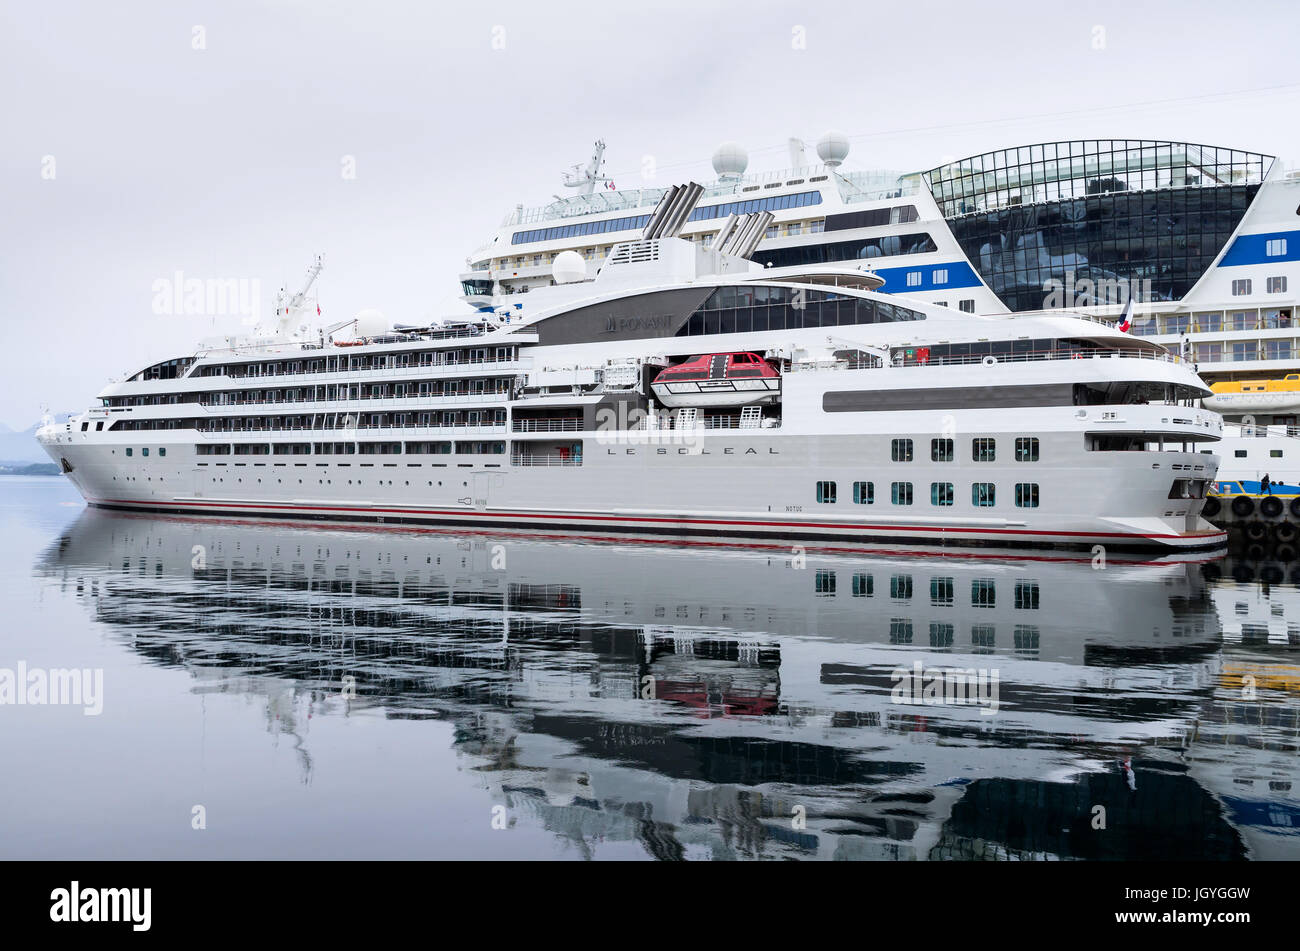 French cruise ship LE SOLEAL in Alesund. LE SOLEAL has 132 cabins and suites for 264 passengers and is owned and operated by Compagnie du Ponant. Stock Photo